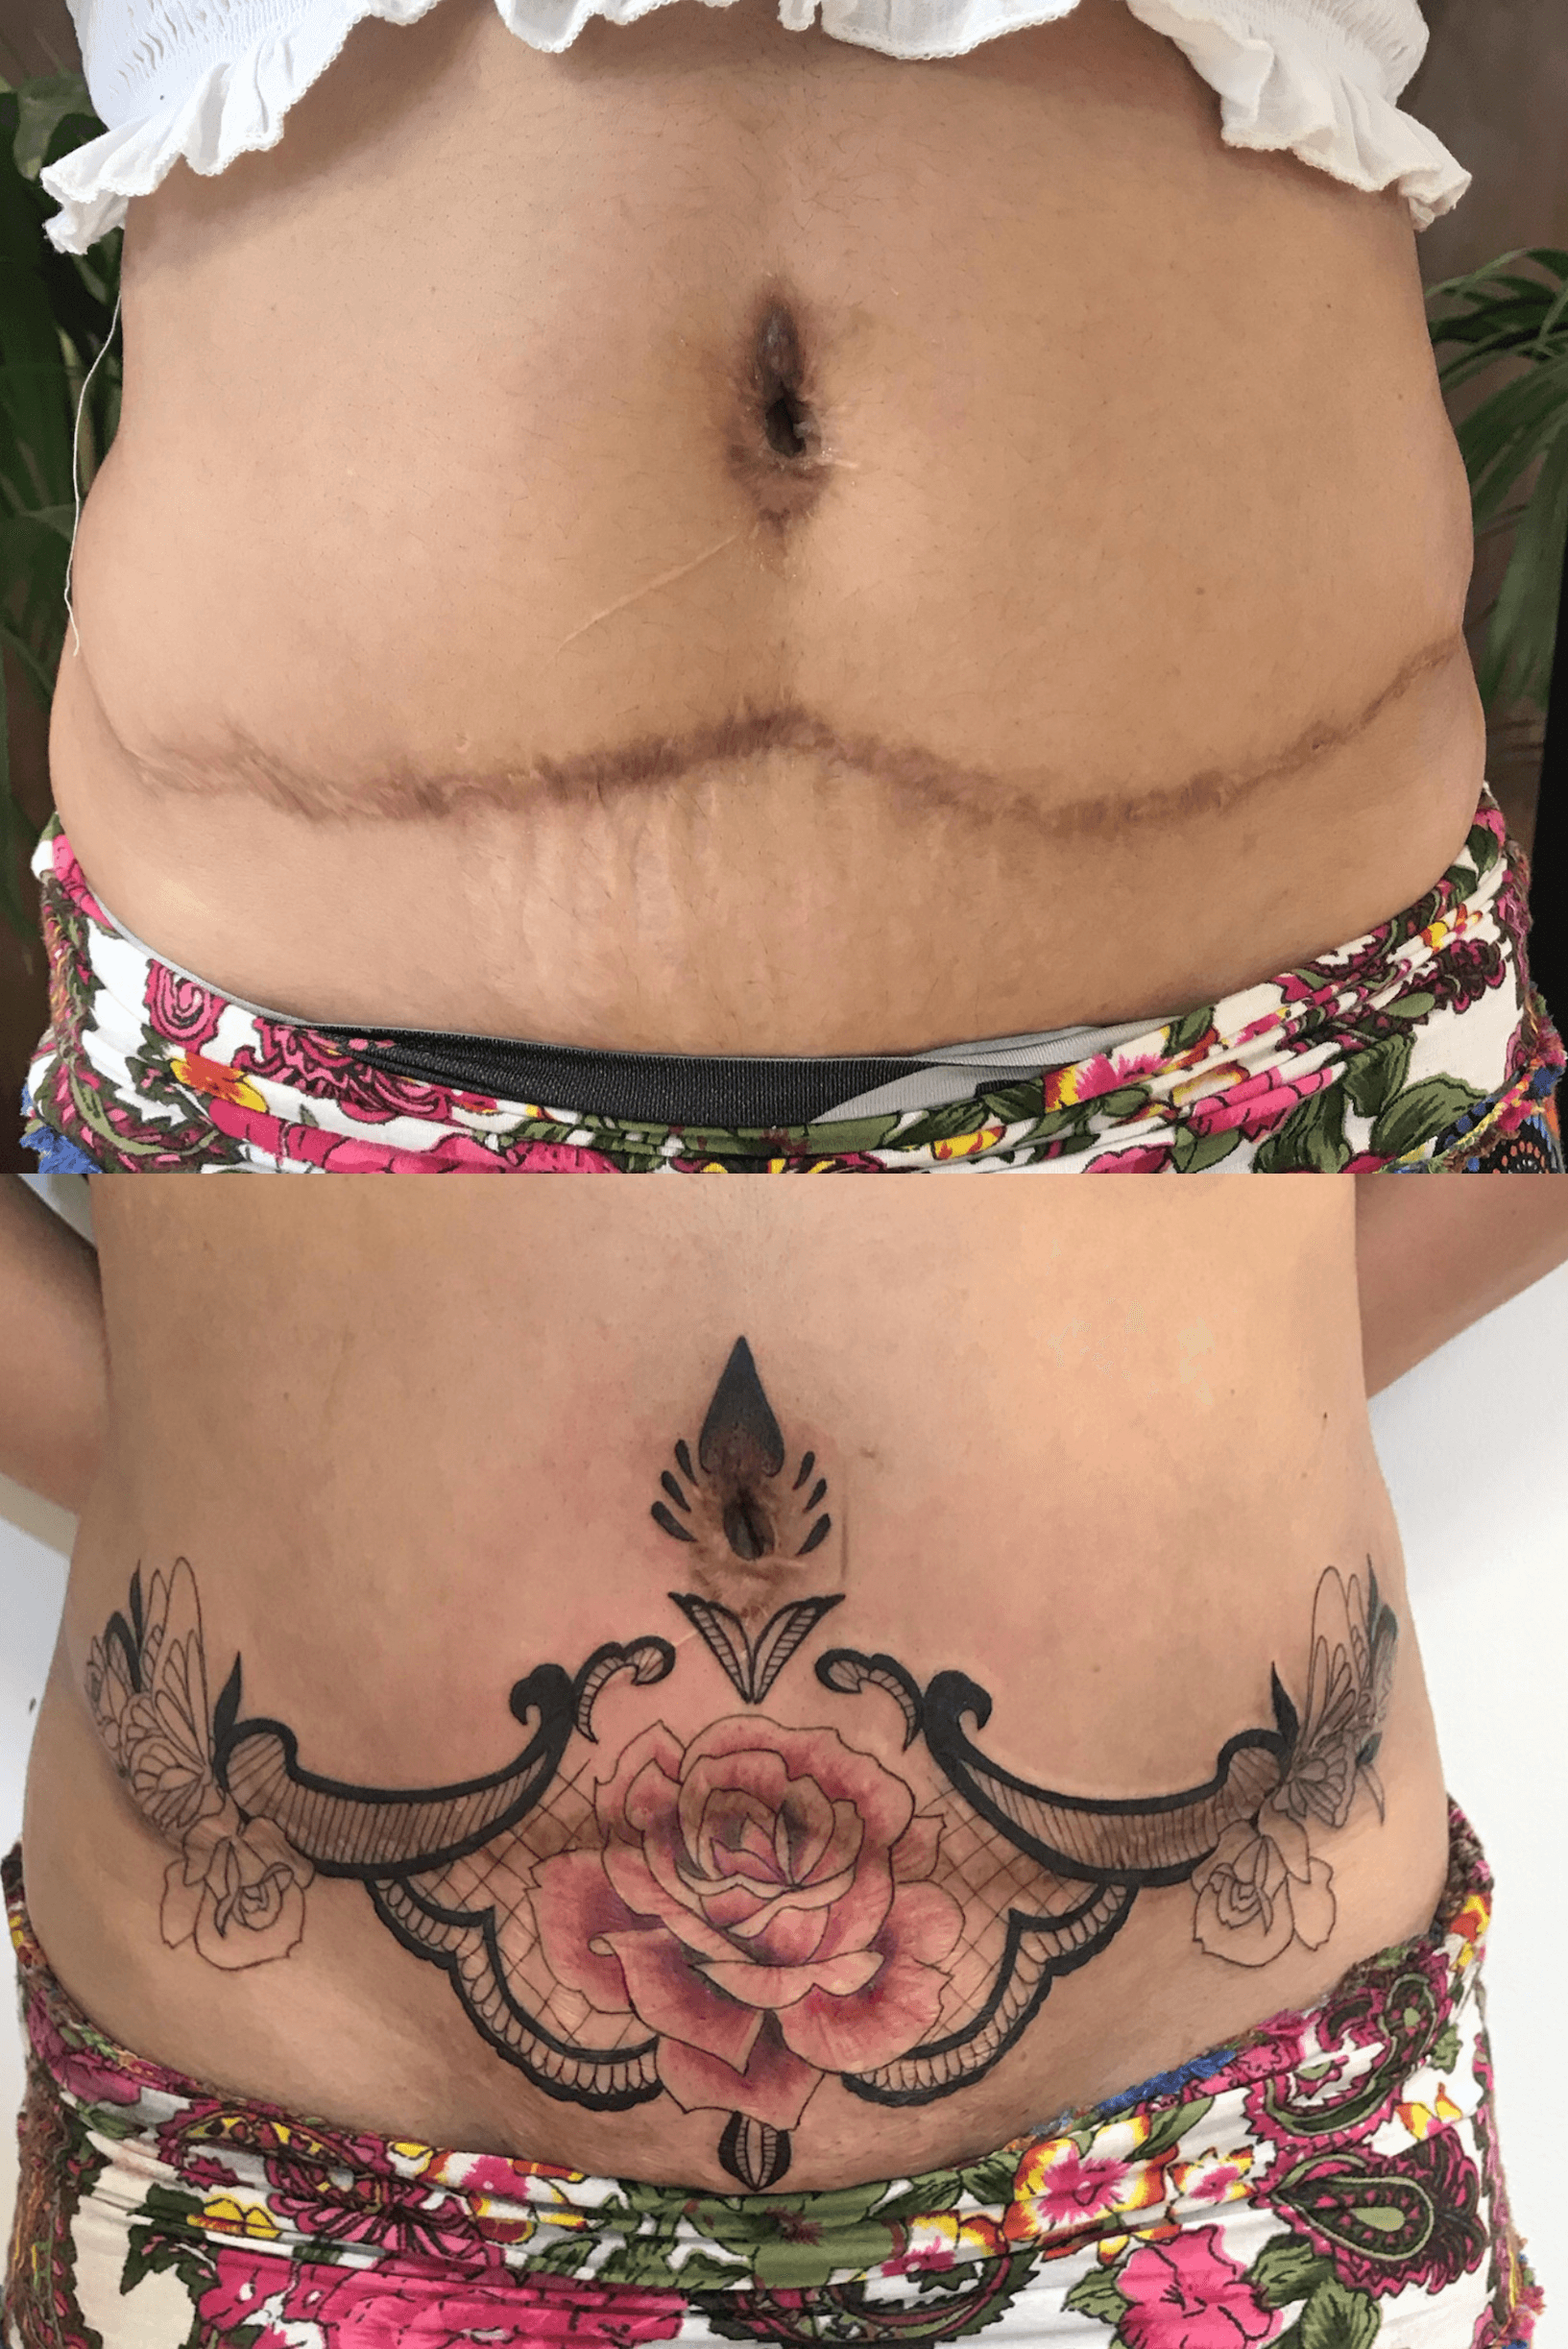 Planning on getting a stomach tattoo mainly to cover a tummy tuck  I know  many tattoos and its placement are more accepted than others  Whats your  thoughts on them trashy 